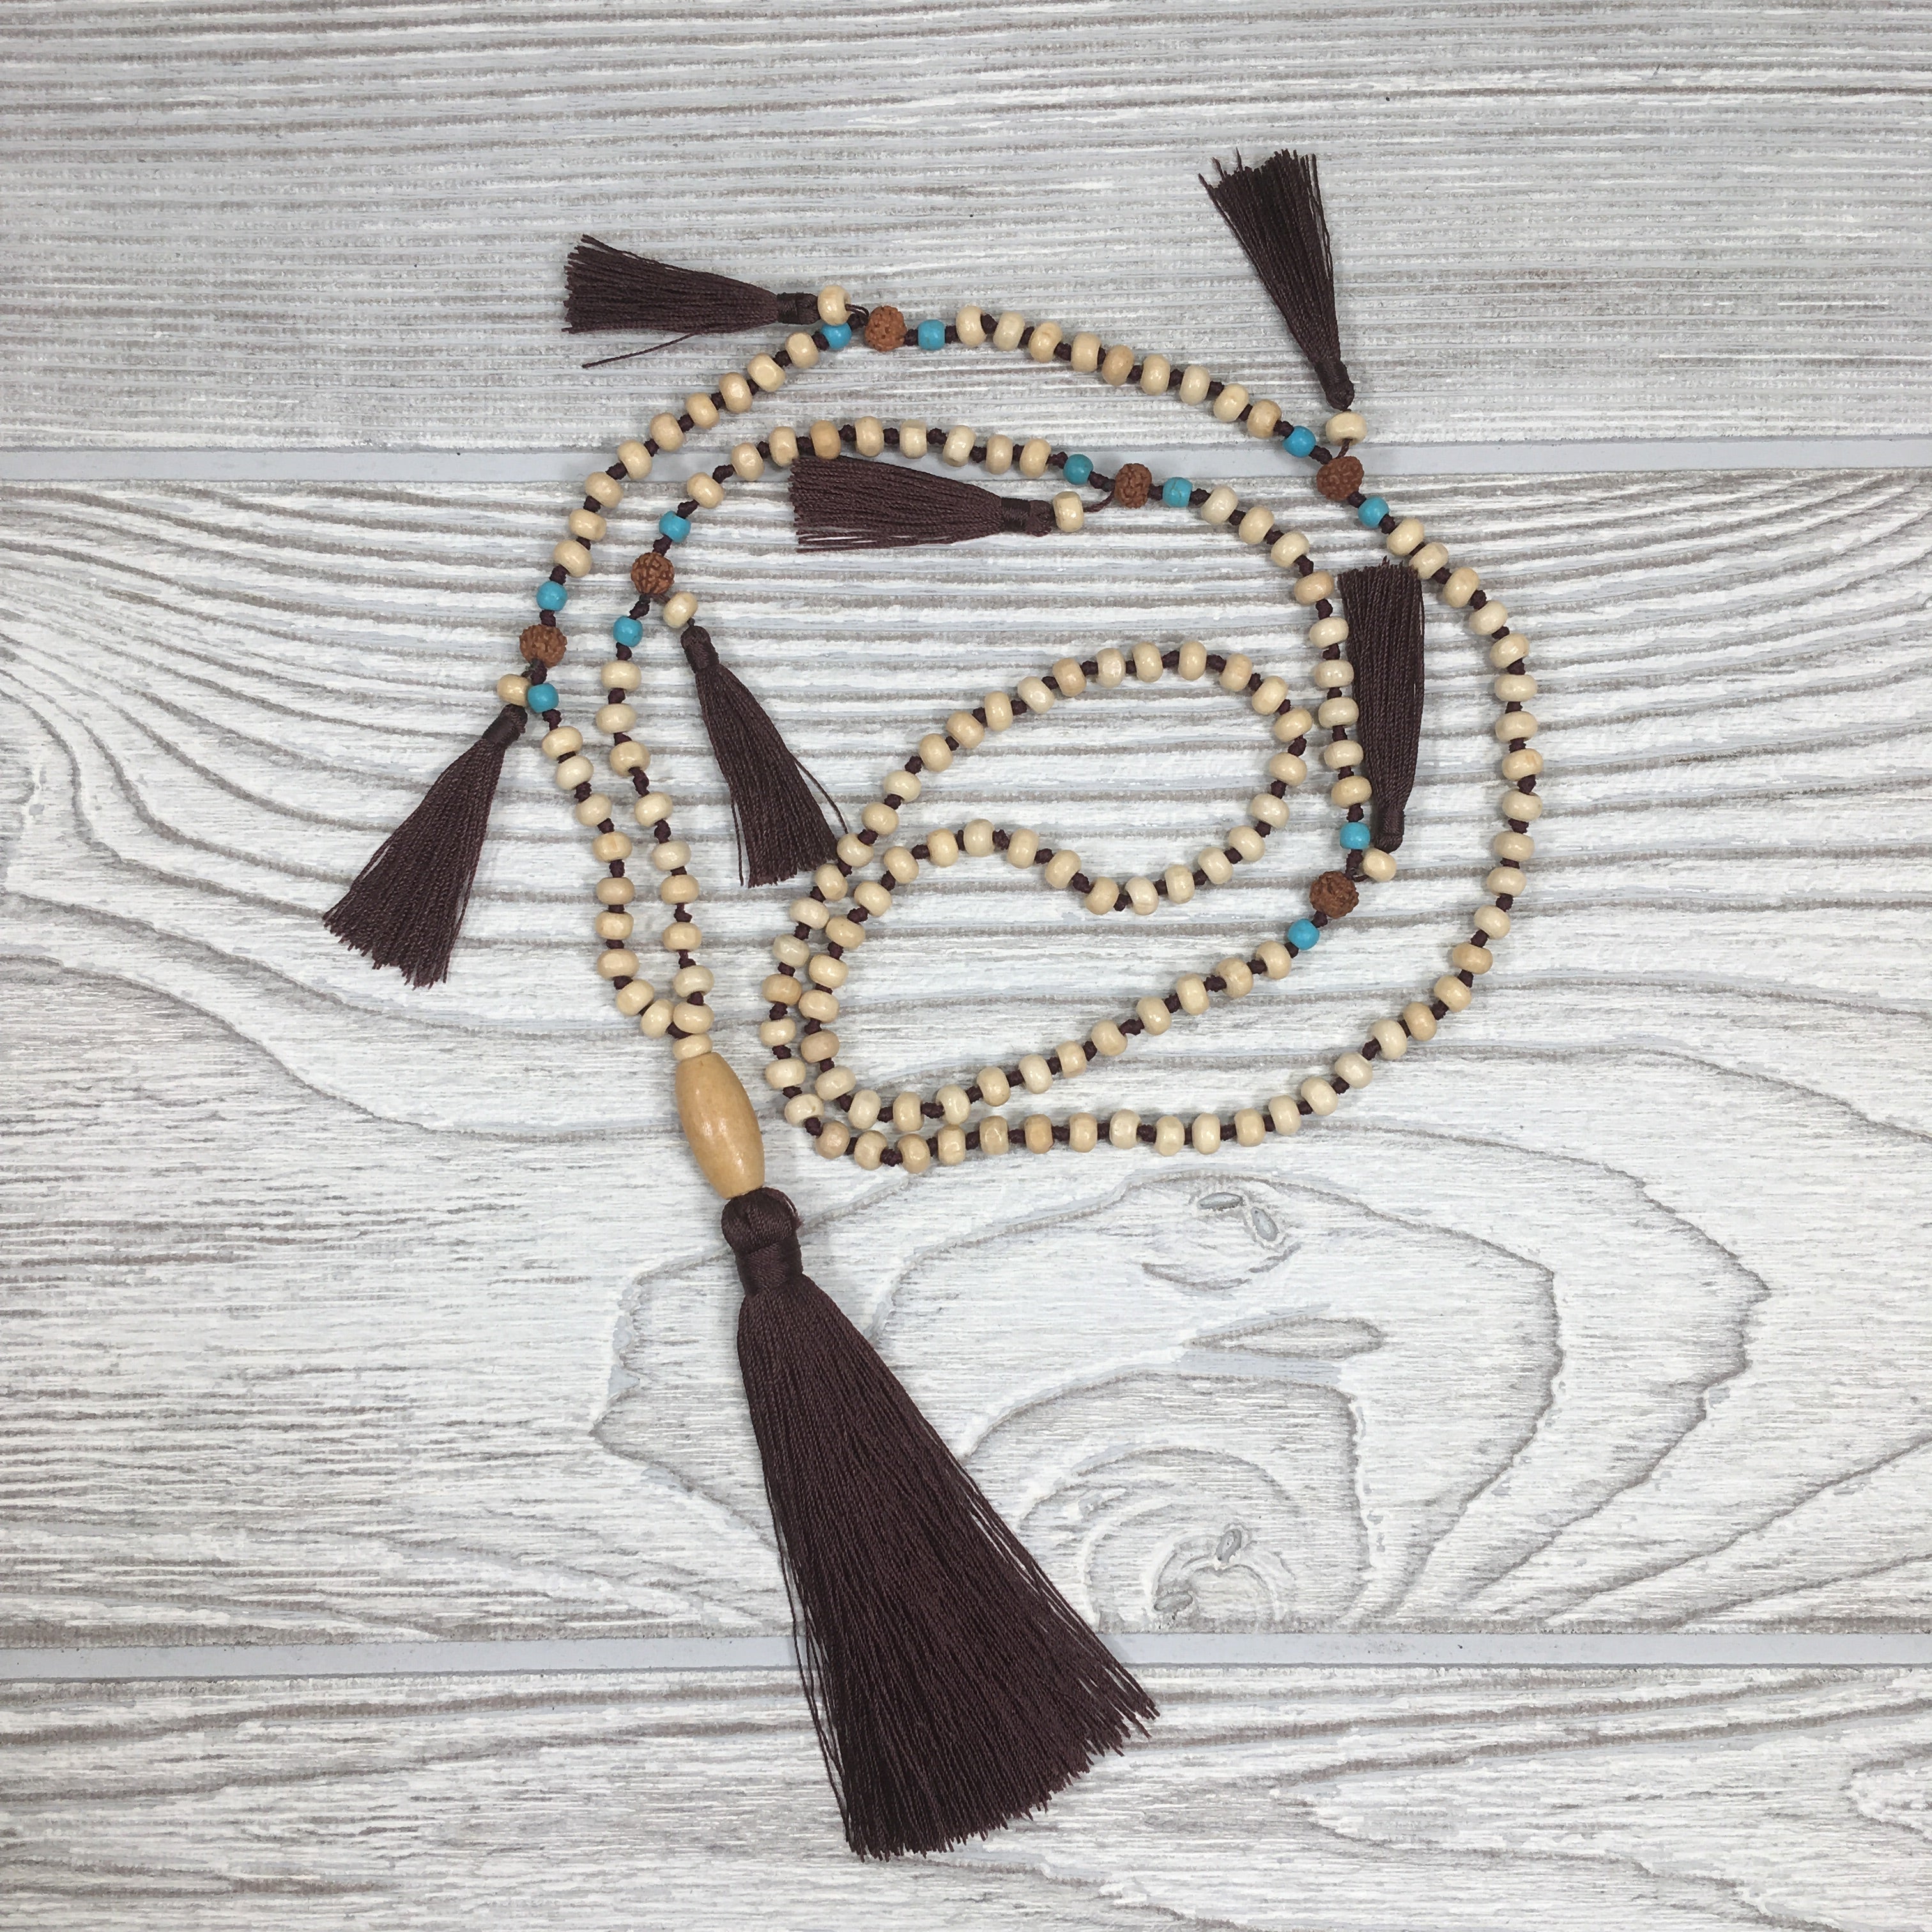 Knotted Wood Mala Necklace Dark Brown Tassels